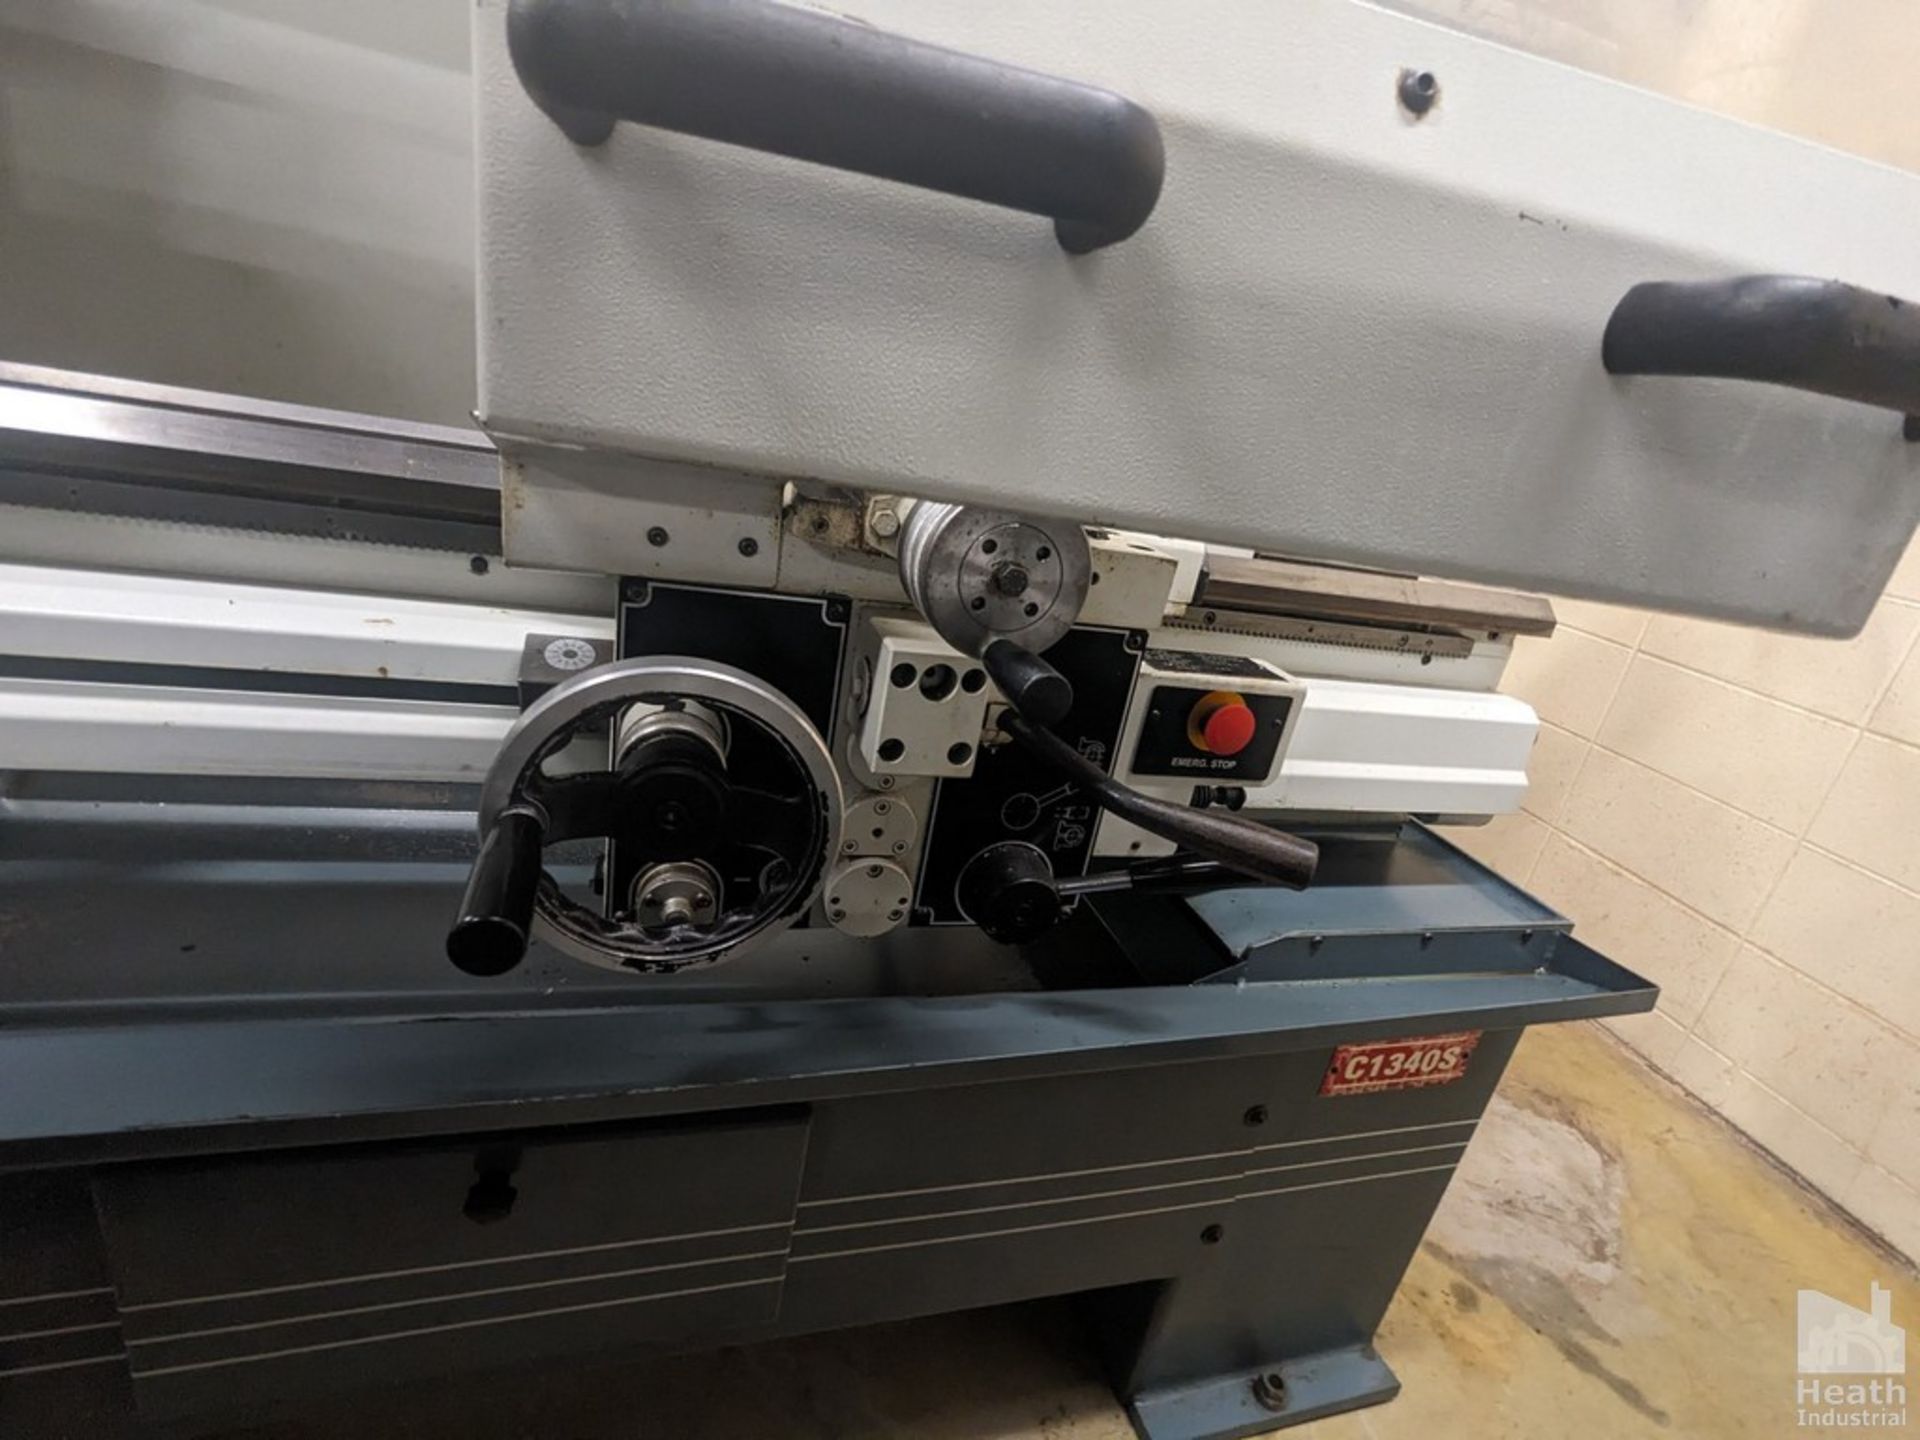 CLAUSING-METOSA 13"X40" MODEL 1340S TOOLROOM LATHE, S/N 49933, 2500 SPINDLE RPM, WITH 6" 3-JAW - Image 8 of 8